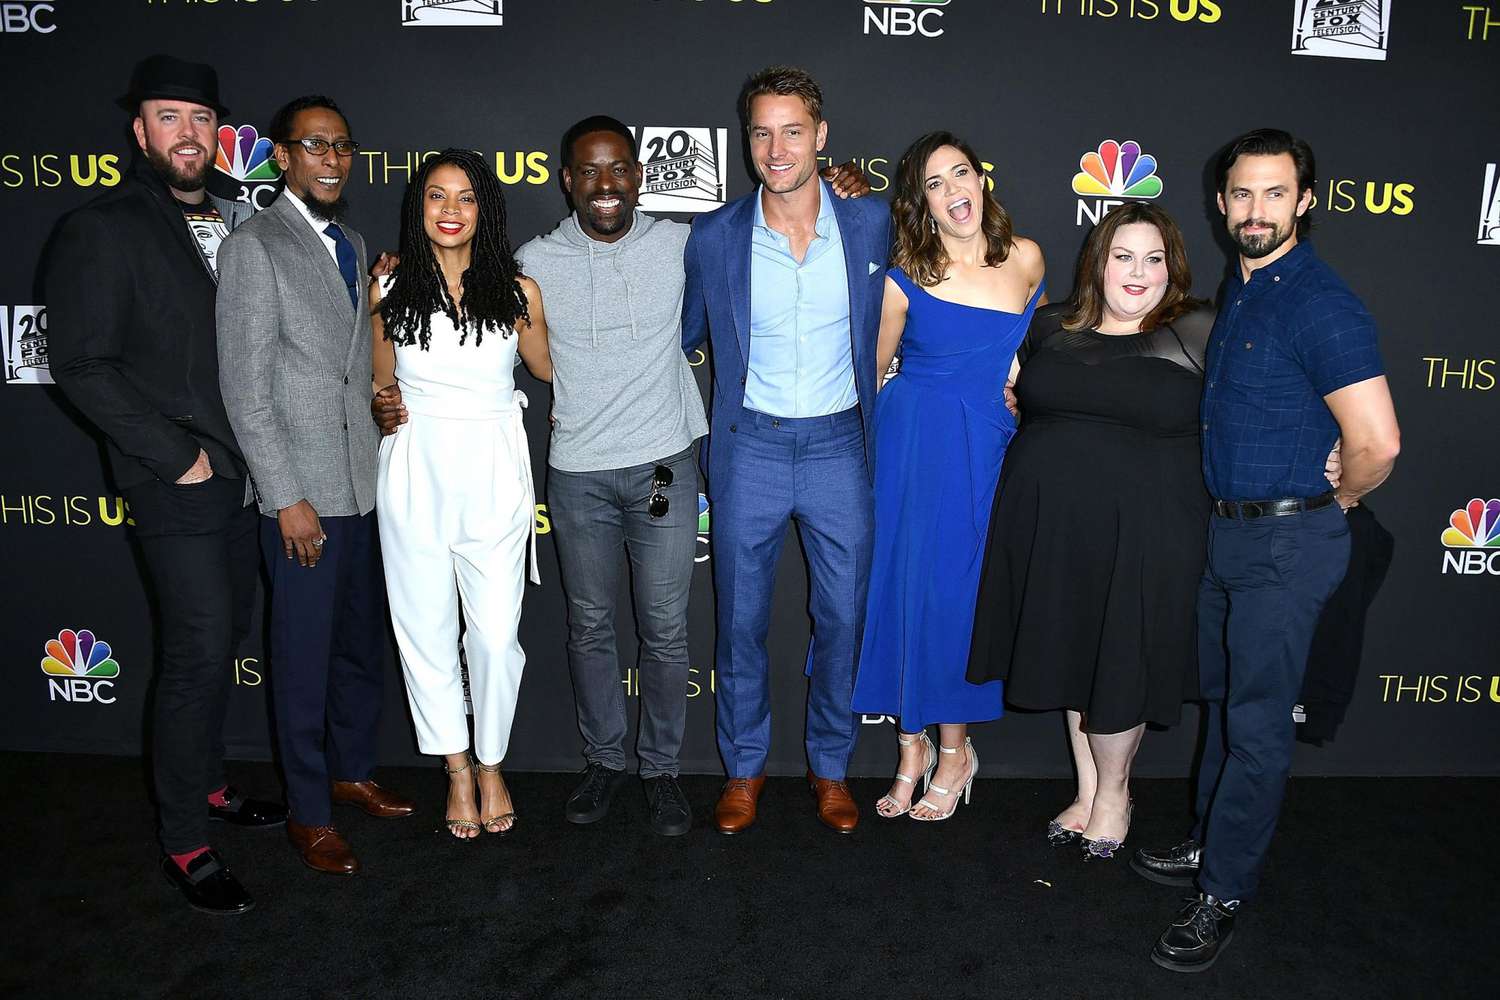 NBC's "This Is Us" FYC Screening And Panel - Arrivals